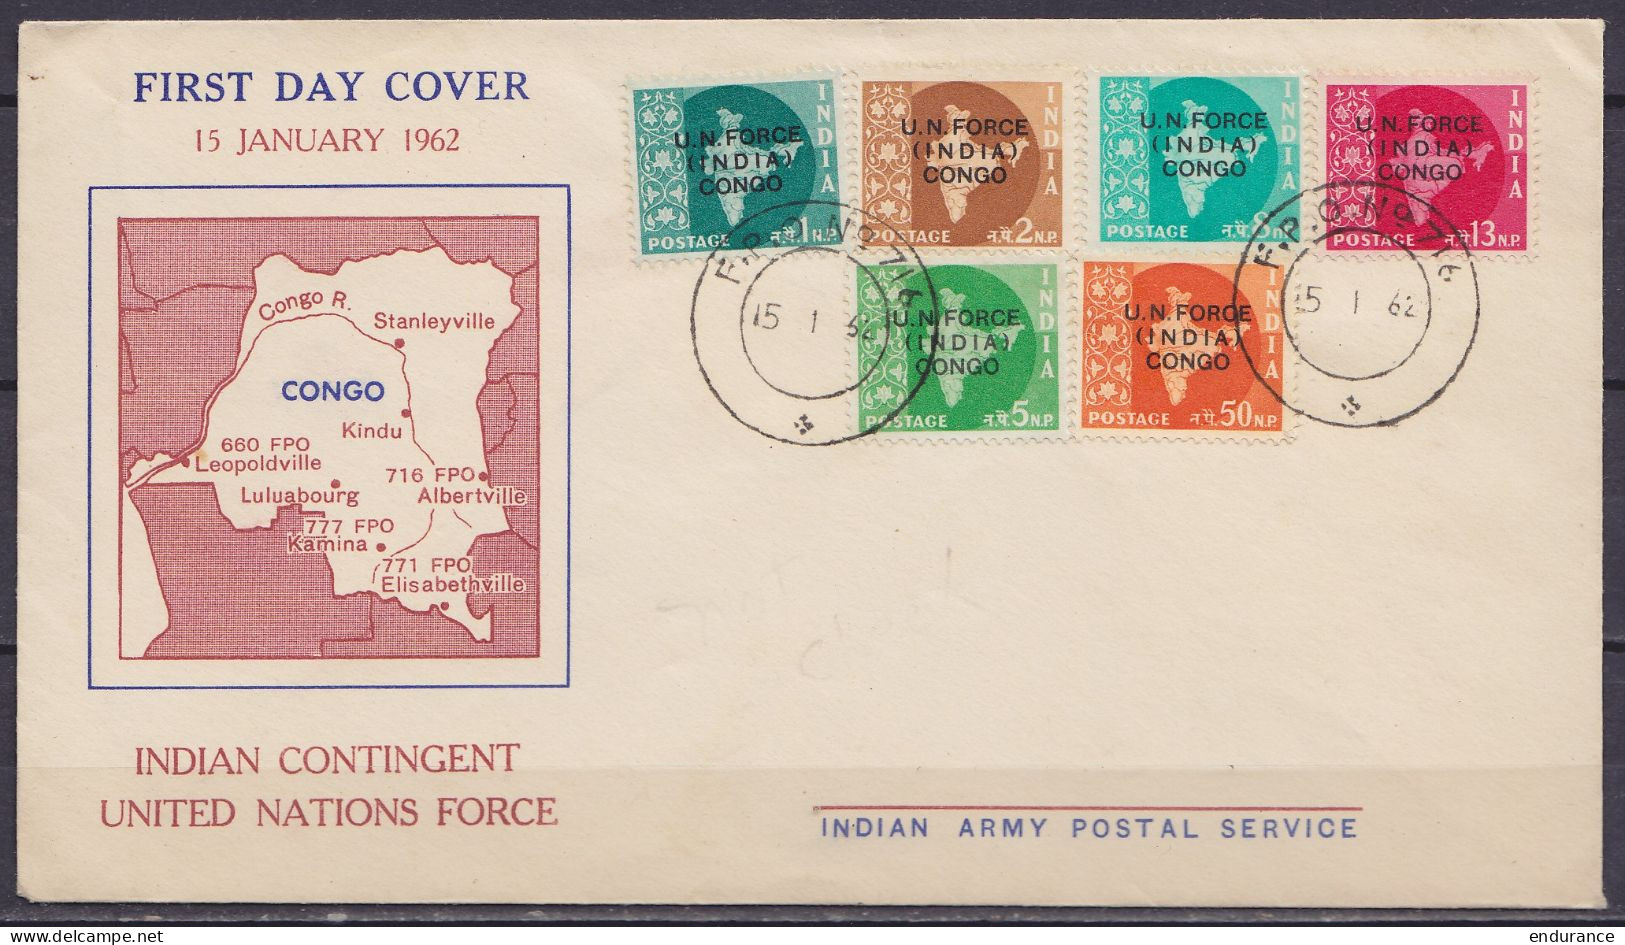 Congo - FDC Timbres De Franchise "U.N. FORCE (INDIA) CONGO N°1/6 Càd F.P.O. N°716 /15 1 1962 - Other & Unclassified